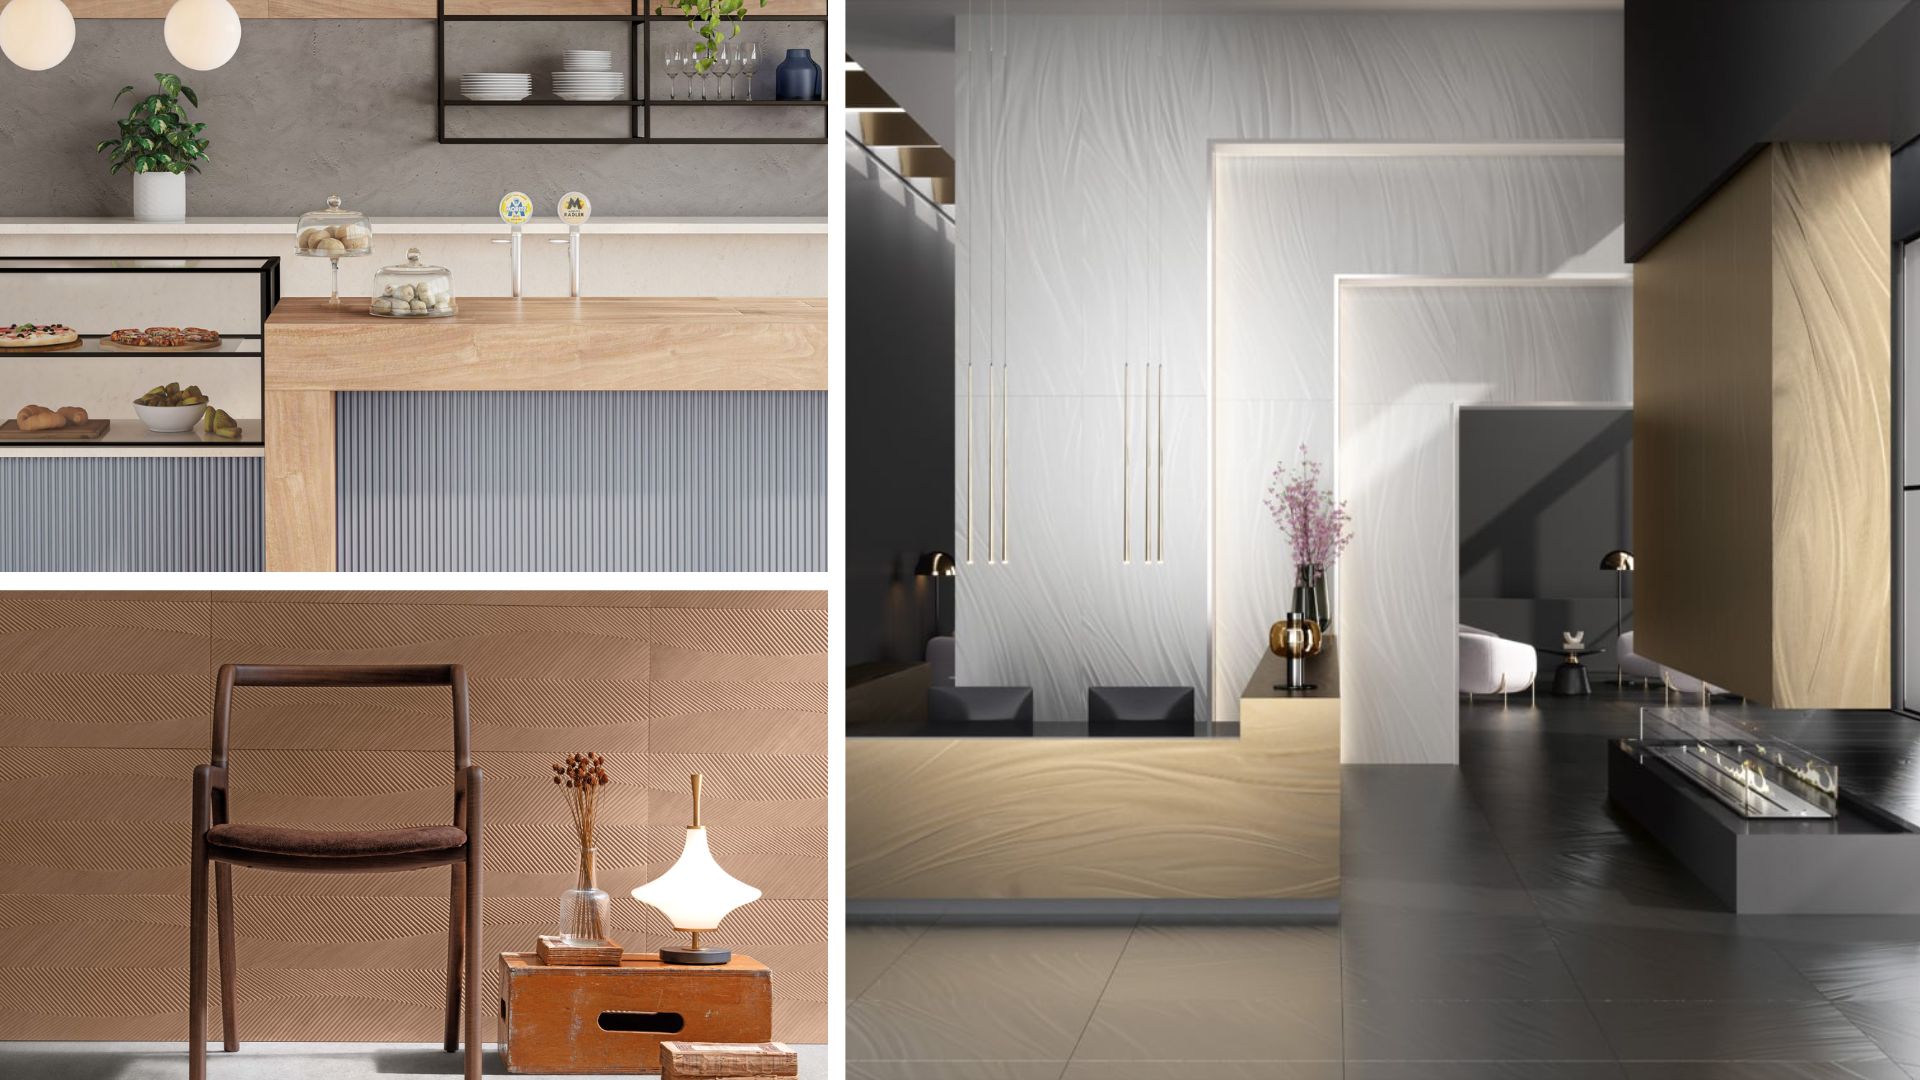 Three examples of Textured Wall tile. Top Left photo shows Mercado Cement Project, Right side photo shows Fiandre Luce, Bottom left photo shows Mercado Mood wall.